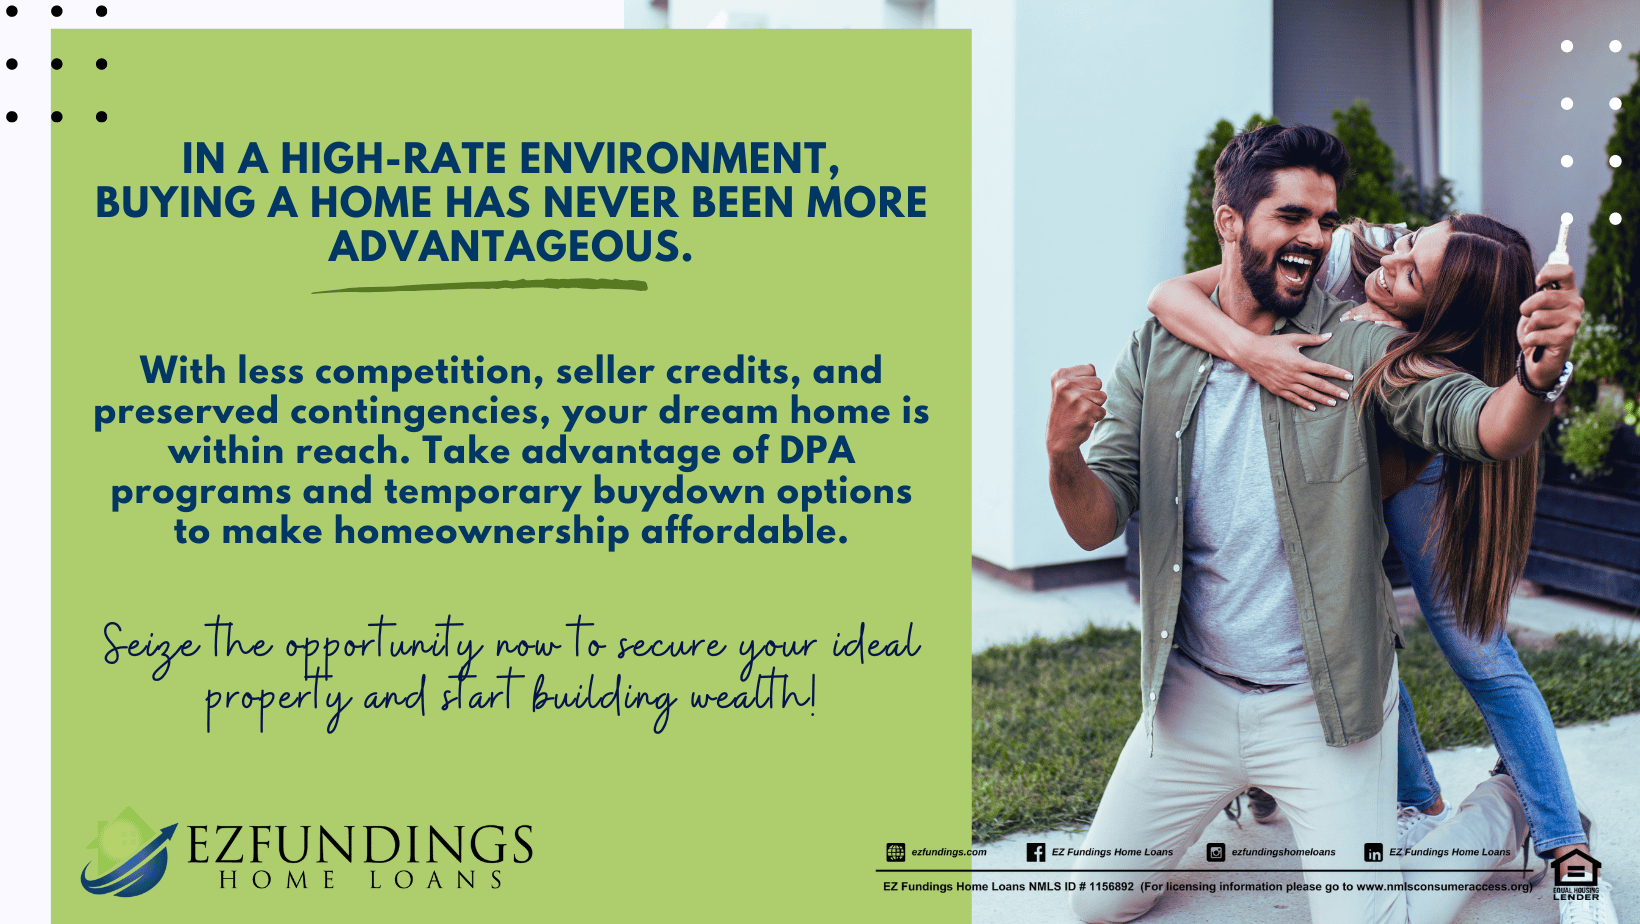 High-rate Environment: Why Now Is The Perfect Time To Buy - seize less competition, seller credits, and beneficial programs for savvy homebuyers.